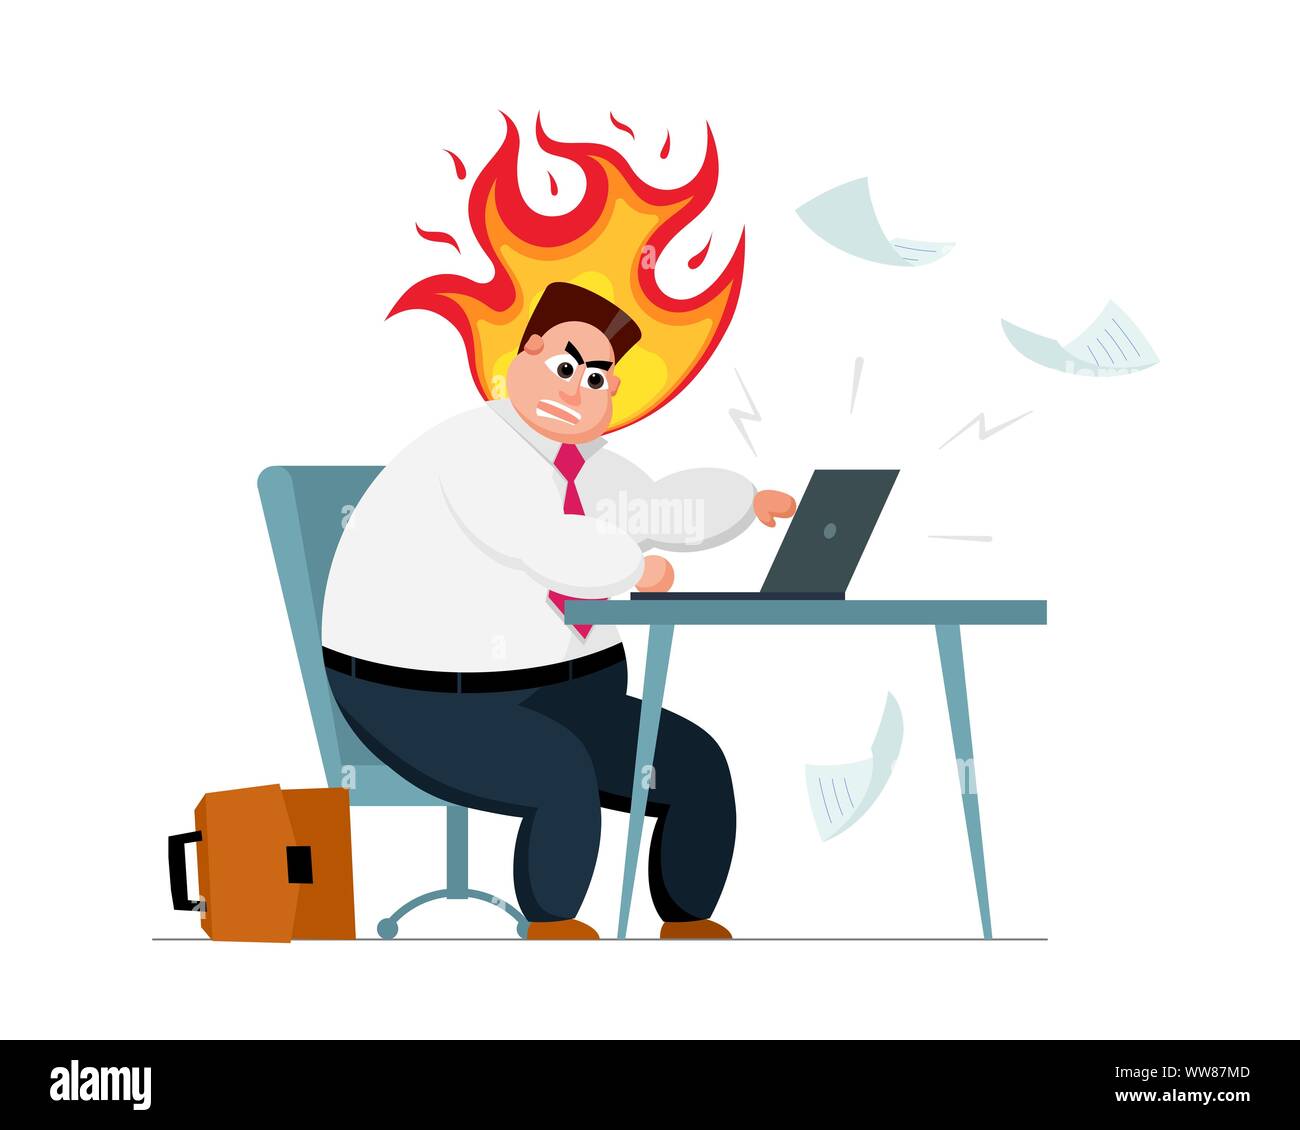 Angry burn fat office worker businessman crushing workplace. Stress and anger furious employee nervous breakdown stress career problems work burnout concept. Negative expression vector illustration Stock Vector